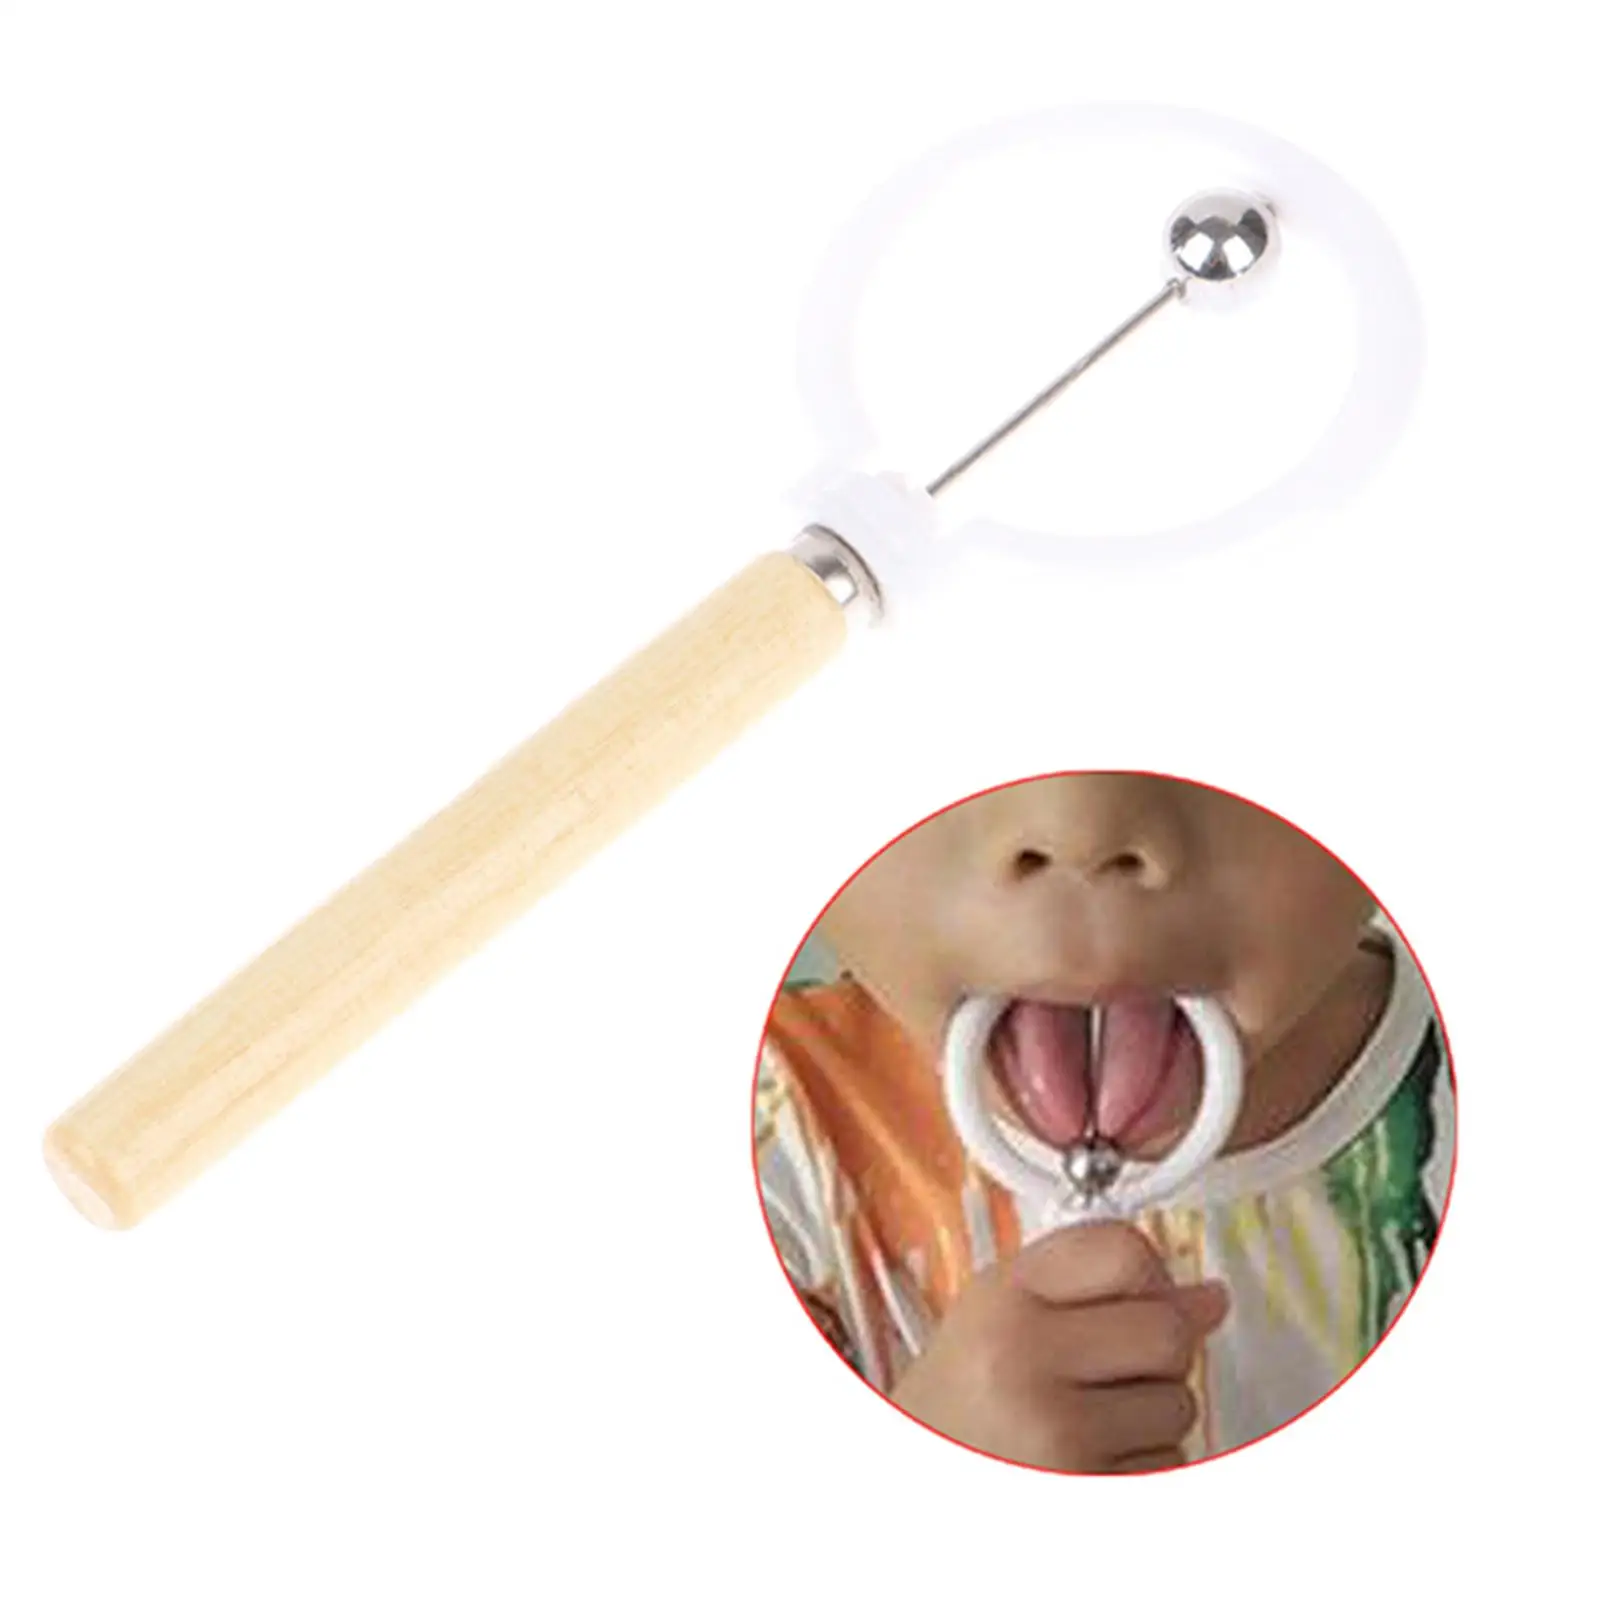 Tongue Exerciser Tongue Muscle Training Tool Tongue Lateralization Lifting Stability Mouth Trainer for Kids 